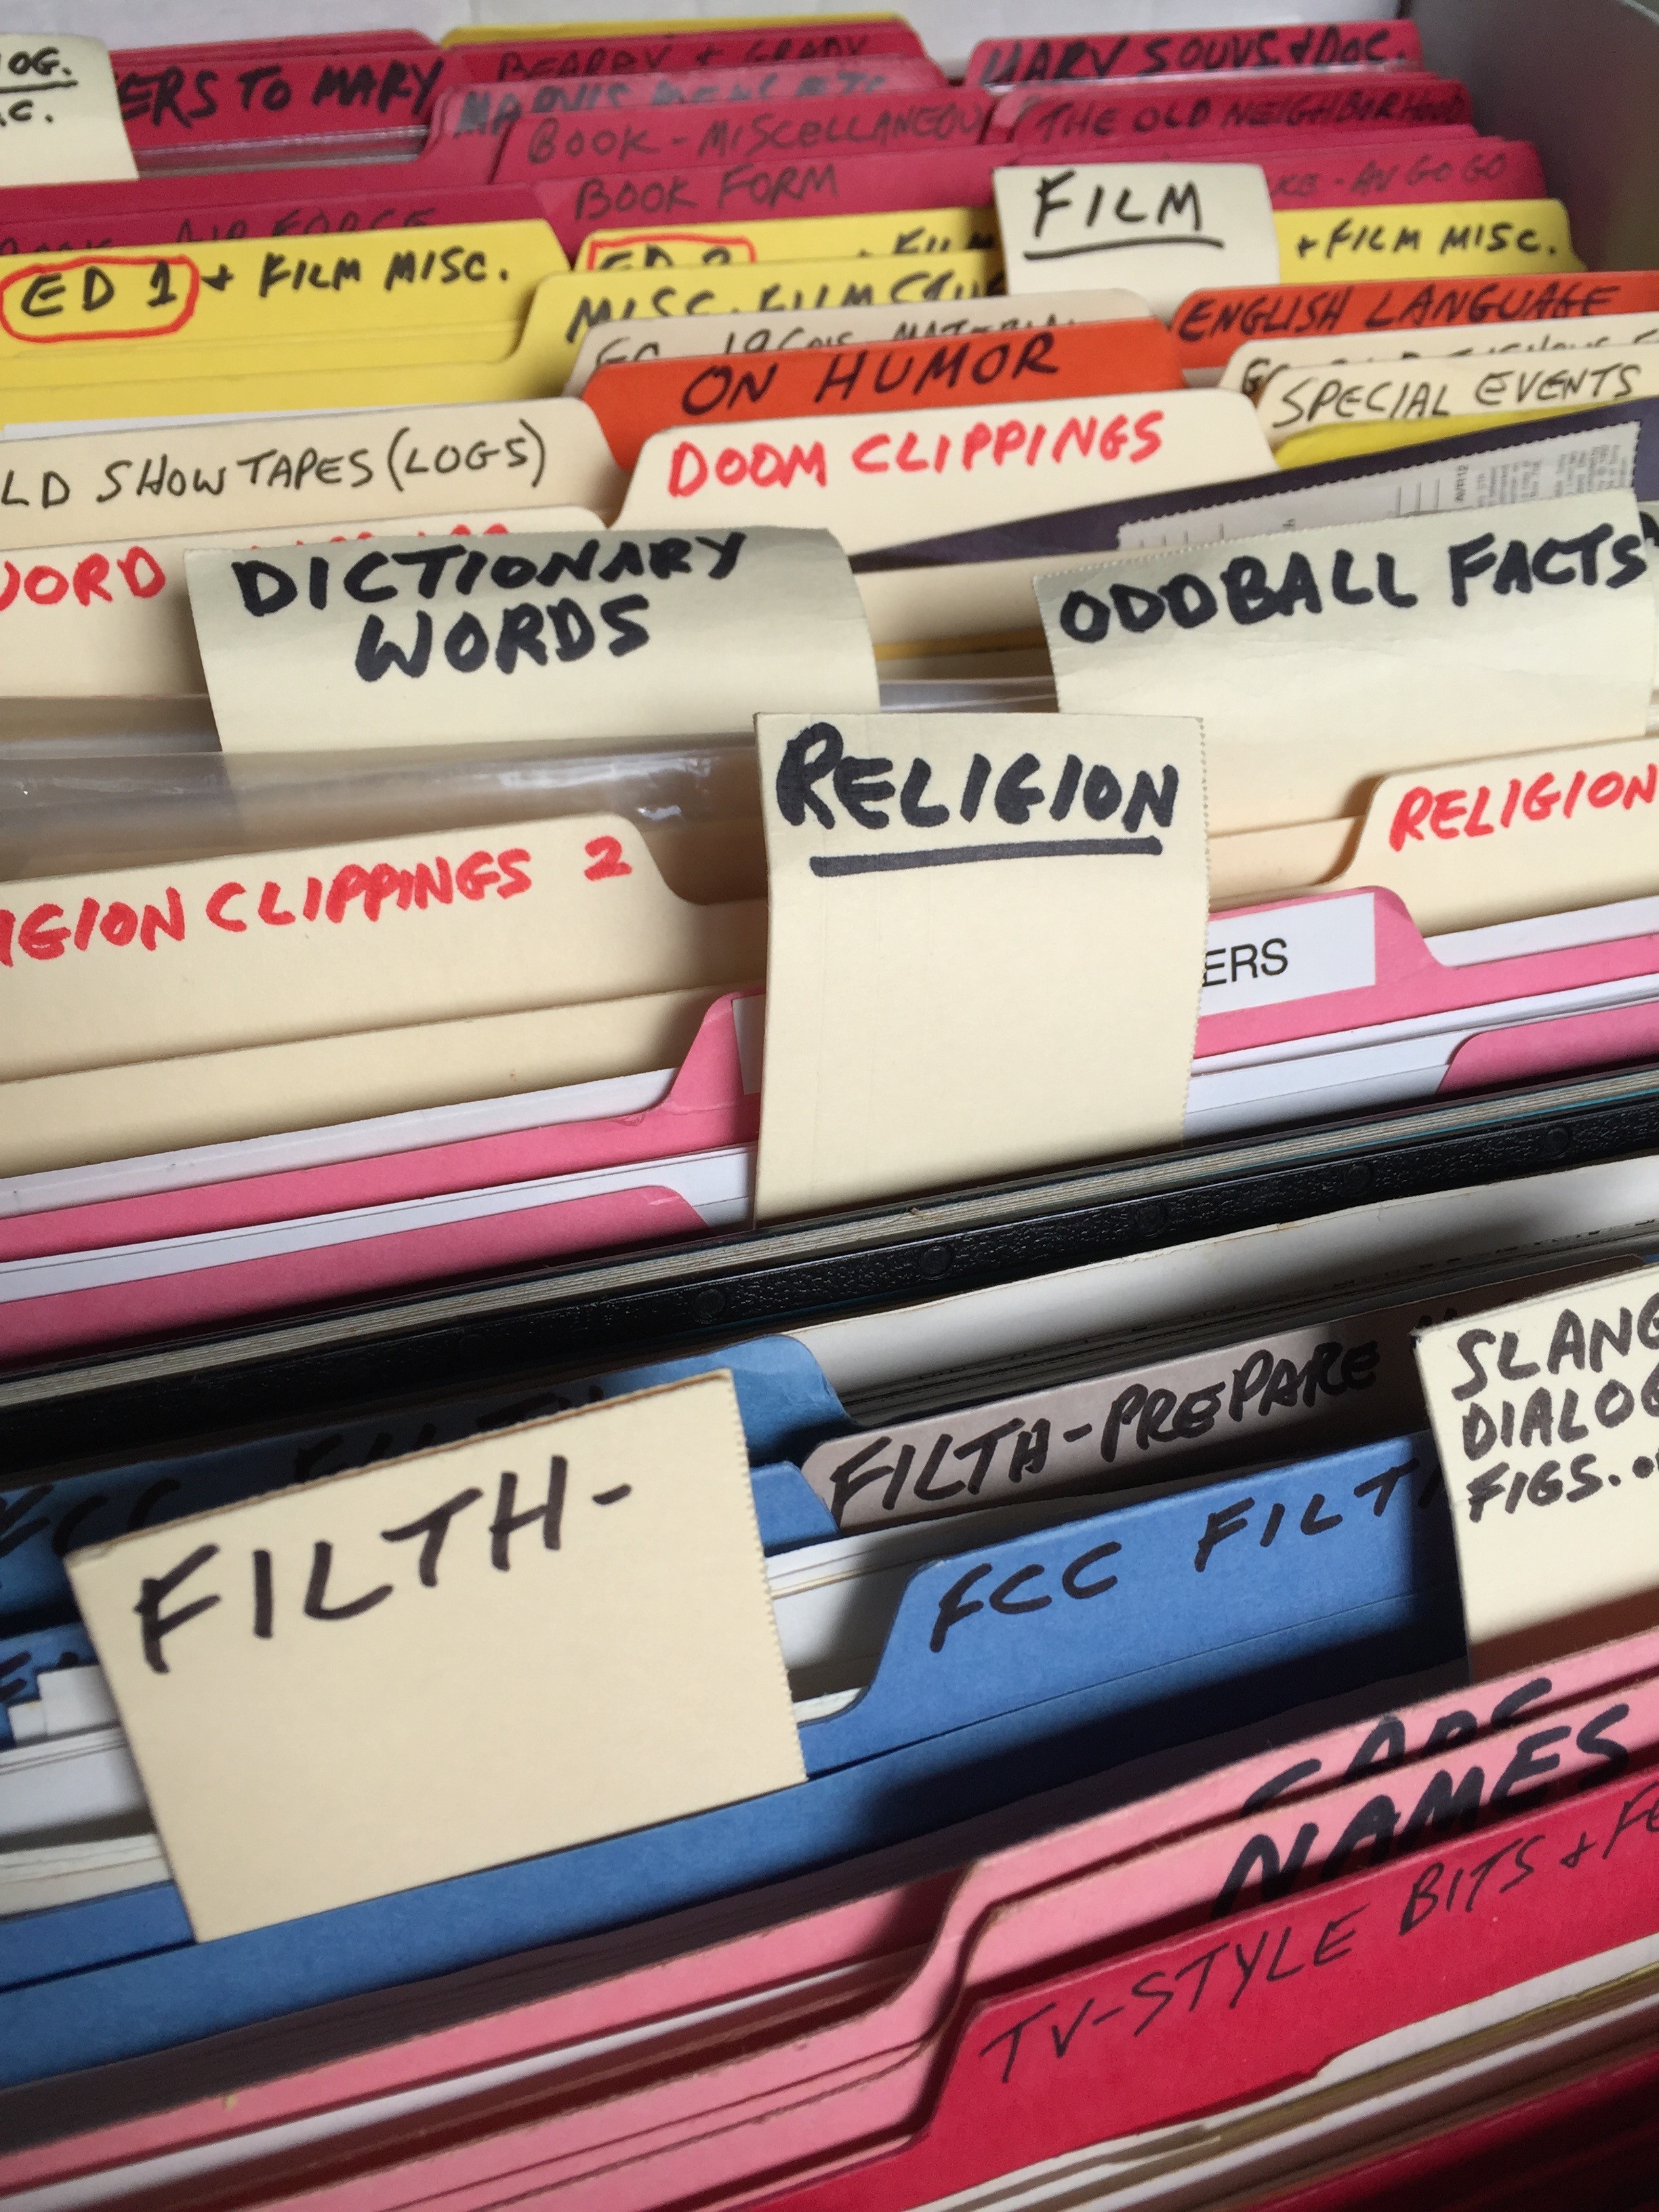 George Carlin's filing system (National Comedy Center/Estate of George Carlin)